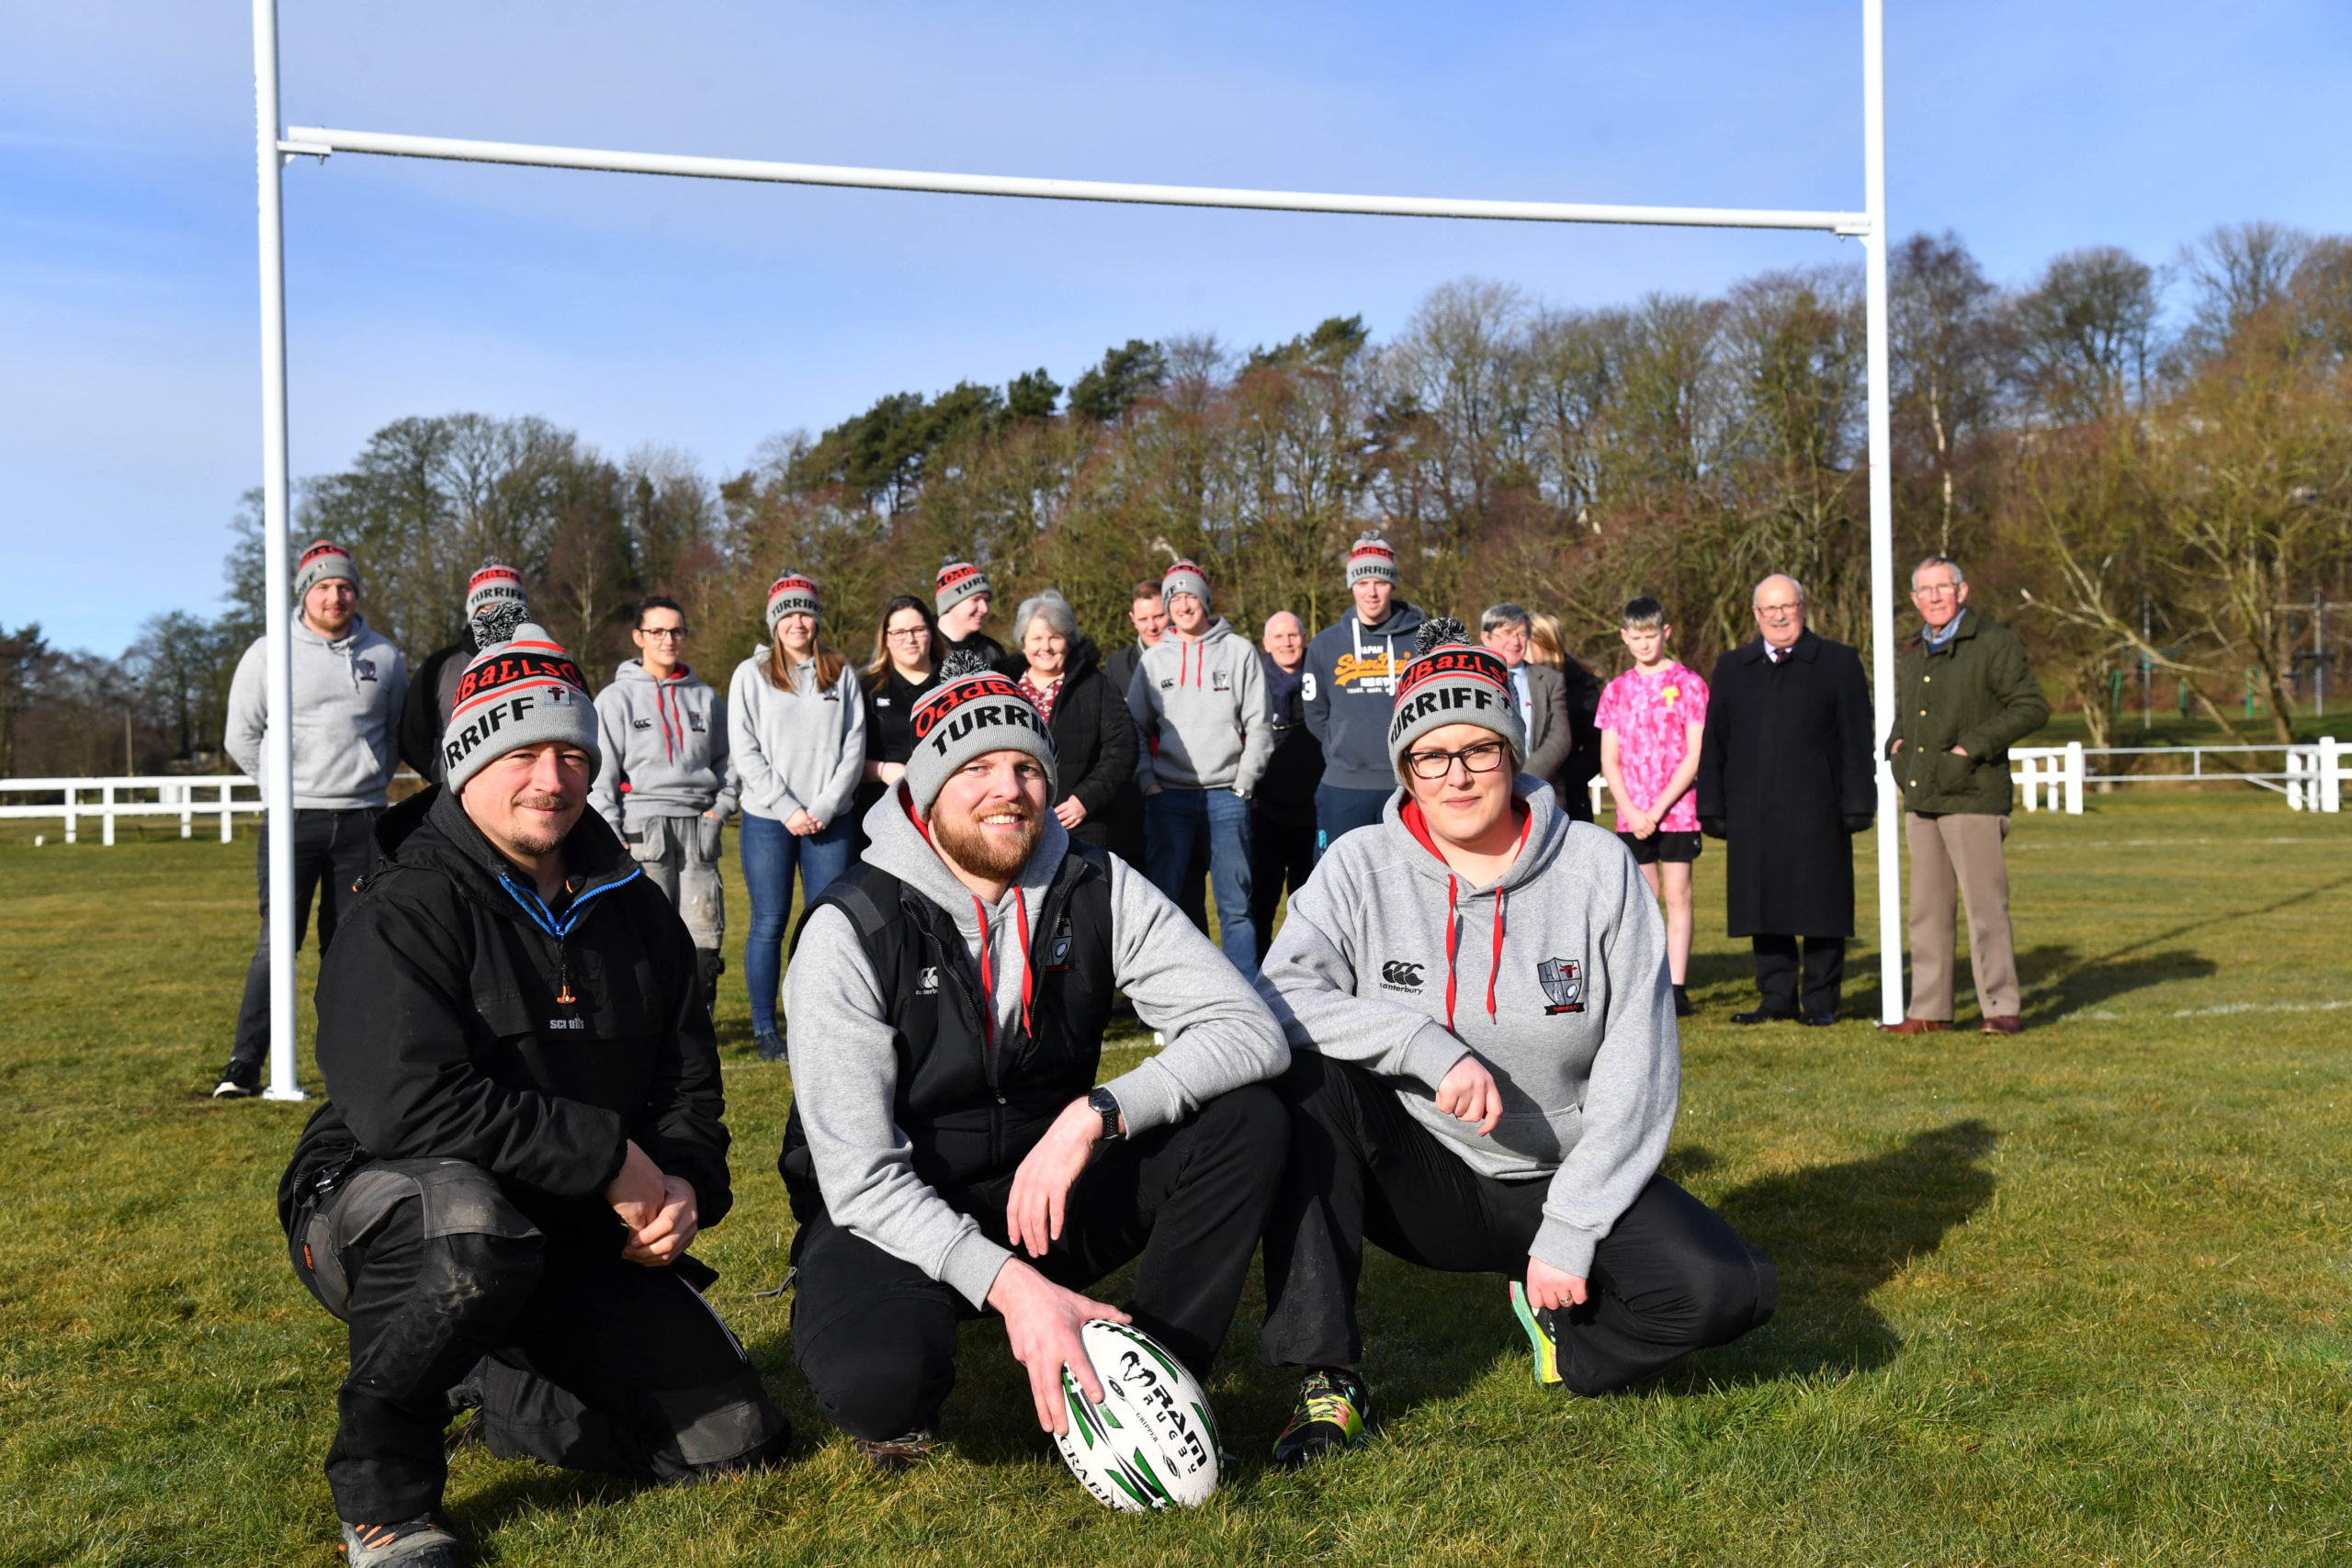 (L TO R) ANDY MCDONALD, JOHN HESTER AND LYNDSEY HESTER AT THE  NEWLY ERECTED RUGBY POSTS AT THE HAUGHS, TURRIFF,WITH MEMBERS OF THE TURRIFF RUGBY CLUB AND LOCAL COUNCILLORS.